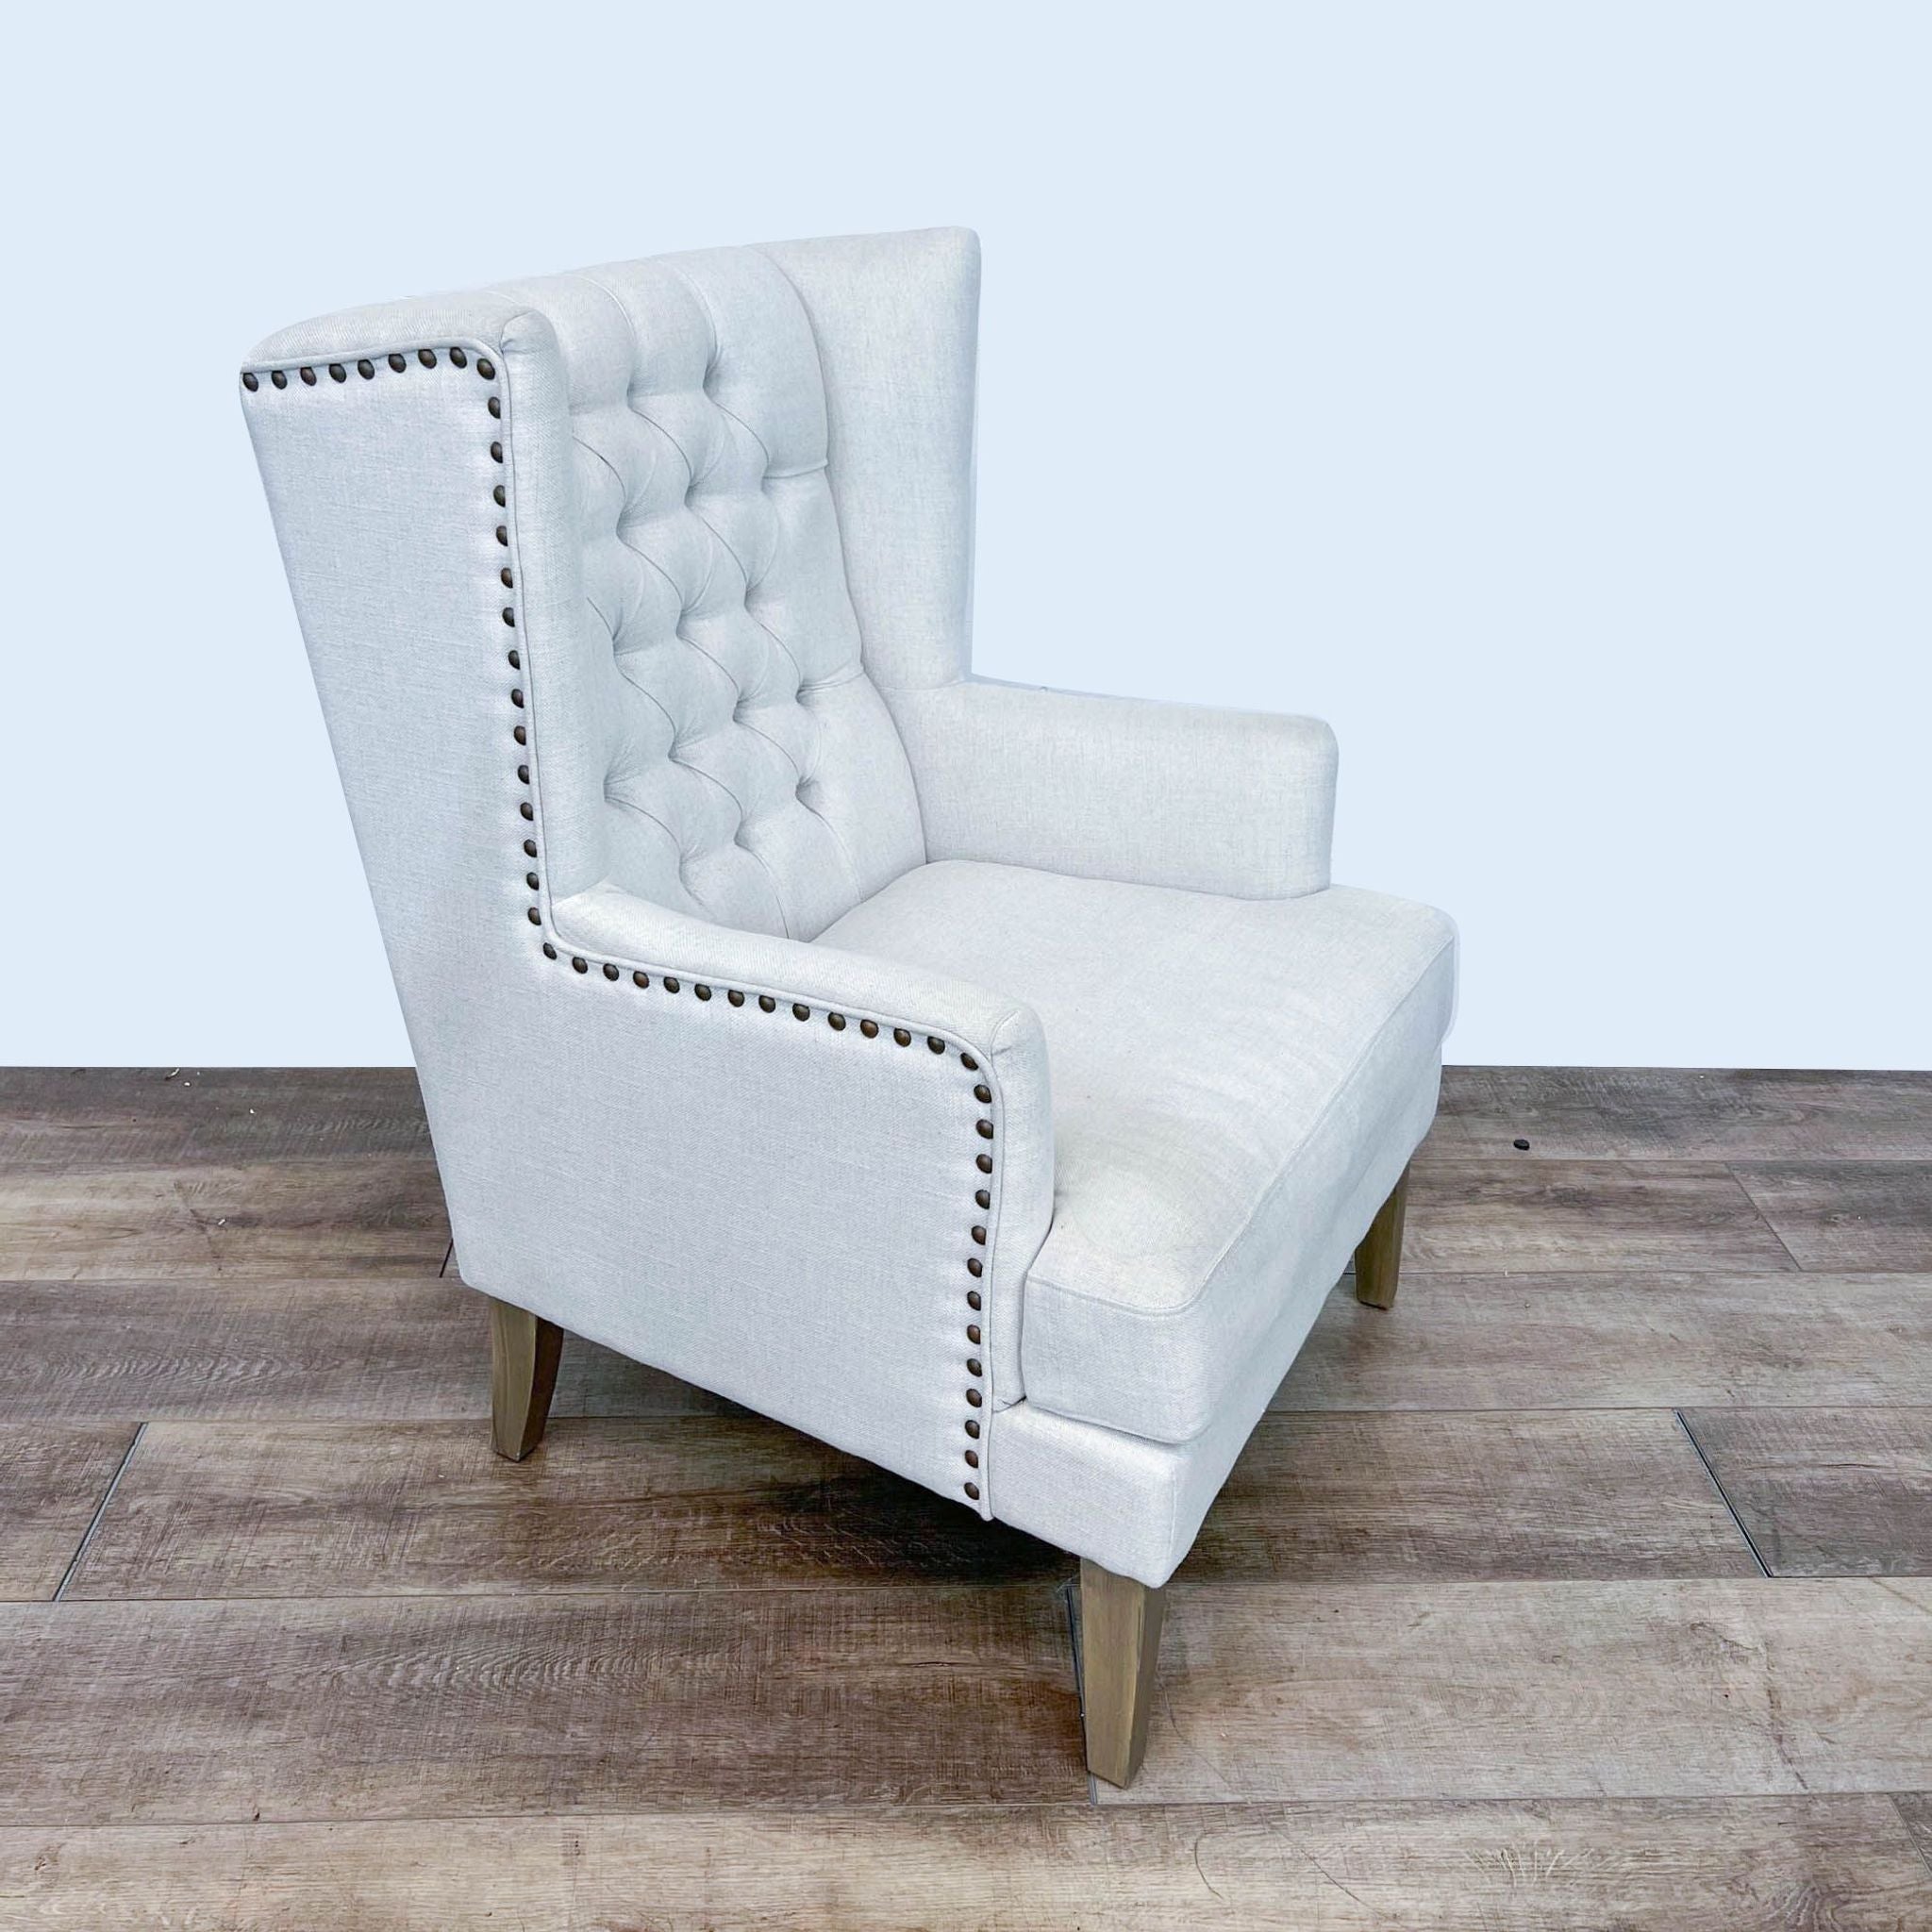 Arhaus contemporary style wingback chair with textured fabric, button tufting, nailhead trim, and tapered wood legs.